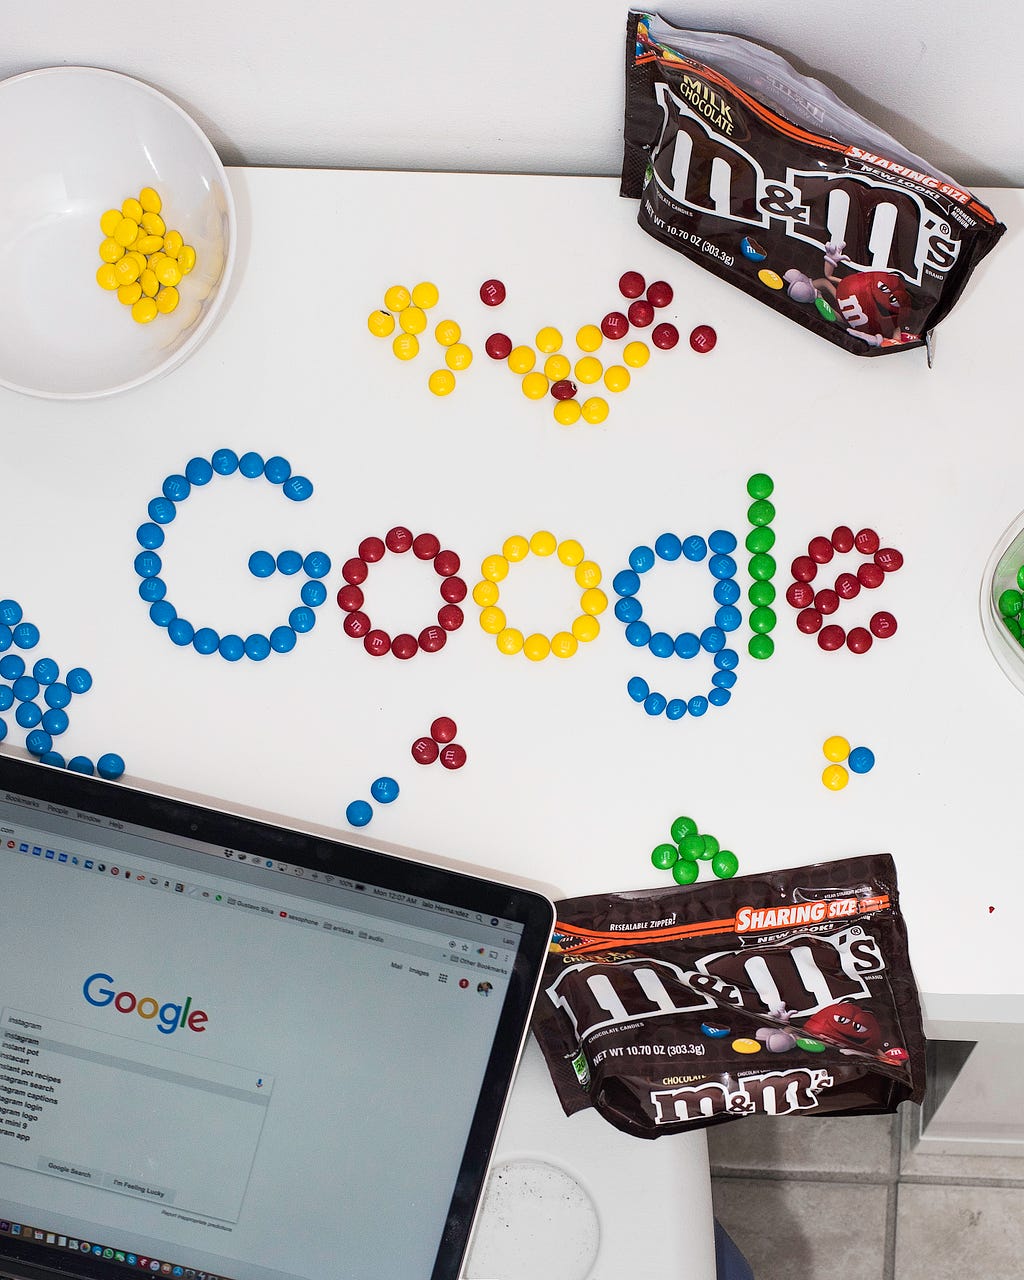 “Google” spelled out on a table in M&M’s